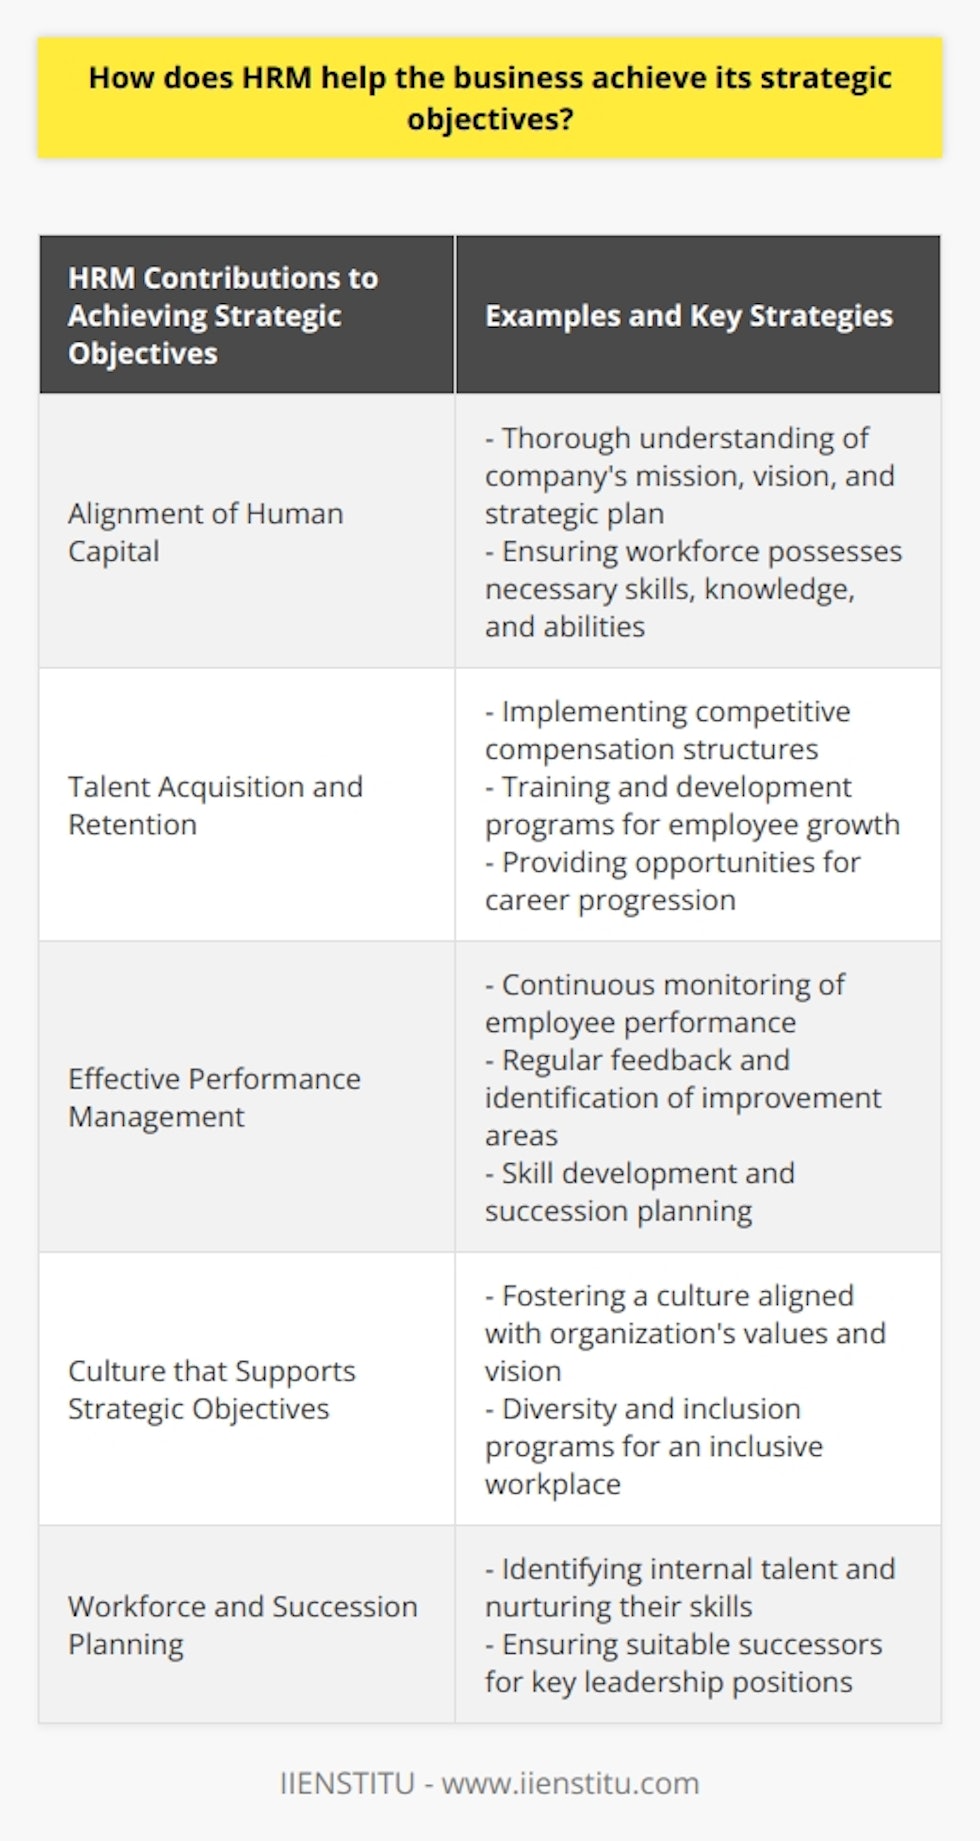 Human Resource Management (HRM) is crucial in helping businesses achieve their strategic objectives. One way HRM achieves this is by aligning human capital with the organization's strategic goals. This requires HR professionals to thoroughly understand the company's mission, vision, and strategic plan. By aligning the workforce according to these objectives, HRM ensures that employees possess the necessary skills, knowledge, and abilities to meet the organization's needs.Talent acquisition and retention are vital aspects of HRM. Through attracting, recruiting, and retaining top talent, organizations can ensure that their workforce has the expertise required to drive business growth and achieve strategic targets. HRM professionals utilize various approaches, such as competitive compensation structures, training and development programs, and offering opportunities for career progression, to ensure employee satisfaction and retention.Effective performance management systems, another responsibility of HRM, are essential for achieving strategic objectives. By continuously monitoring employee performance and providing regular feedback, HRM enables organizations to identify areas for improvement, skill gaps, and performance issues. This insight helps the company make informed decisions regarding employee training, development, and succession planning, ensuring a workforce that remains agile and adaptable in the evolving business environment.HRM also plays a pivotal role in nurturing an organizational culture that supports strategic objectives. By fostering a culture aligned with the organization's values and vision, HRM creates an environment where employees can excel in their roles while contributing to the achievement of business goals. Additionally, HRM initiatives, such as diversity and inclusion programs, enable organizations to establish an inclusive workplace that values diverse perspectives and ideas.Workforce and succession planning, another critical HRM responsibility, involves preparing the organization for future workforce needs and ensuring suitable successors for key leadership positions. By identifying internal talent, nurturing their skills, and providing growth opportunities, HRM ensures a seamless transition that supports the company's strategic objectives.In conclusion, HRM significantly contributes to the achievement of an organization's strategic objectives. Through aligning human capital with business goals, talent acquisition and retention, performance management, organizational culture and values, as well as workforce and succession planning, HRM professionals greatly contribute to the overall success of the organization.